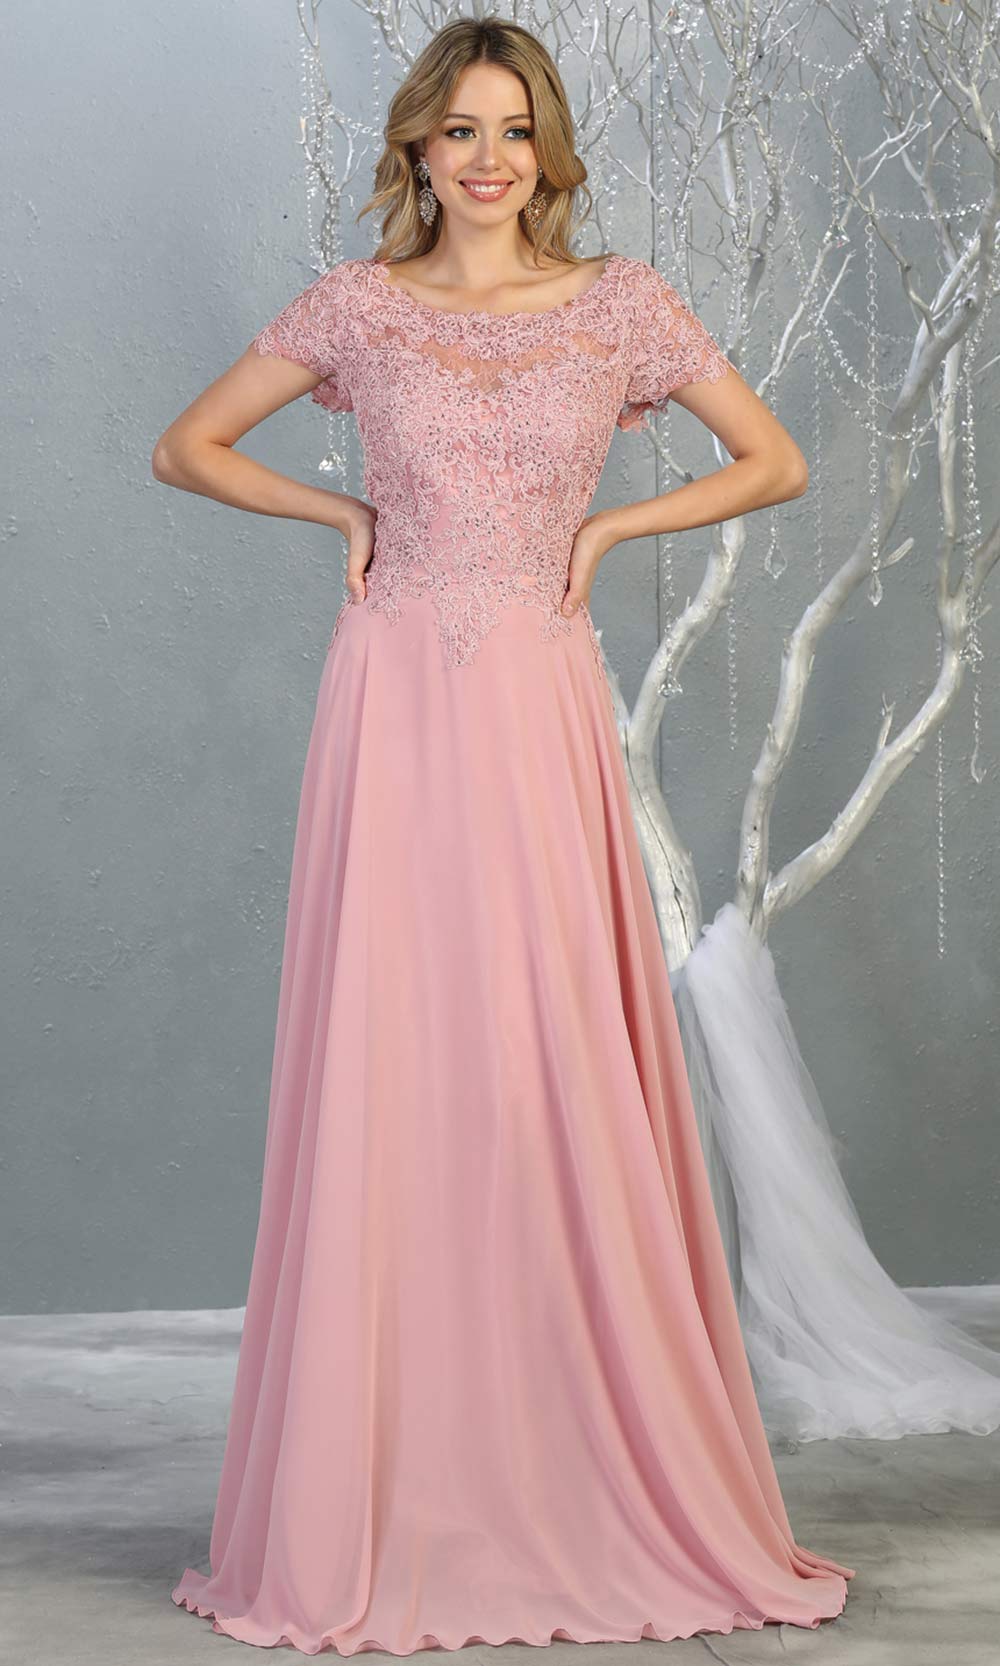 Mayqueen MQ1763 long dusty rose flowy modest dress with cap sleeves & lace top. This light pink dress is perfect for mother of the bride, formal wedding guest dress, covered up evening dress. It has a high neck & high back. Plus sizes avail.jpg